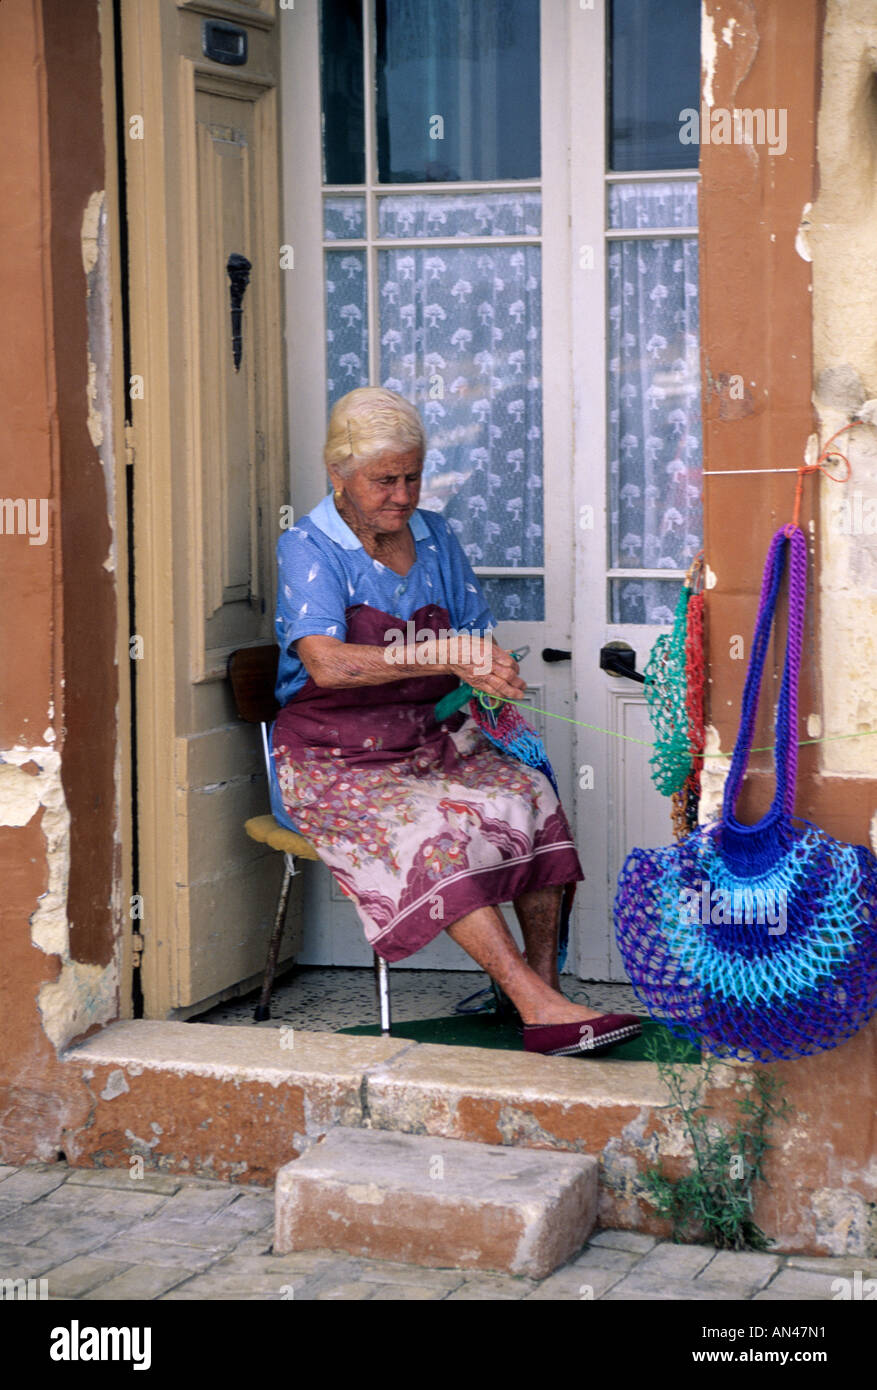 Woman making traditional crafts outside her home in Marsaxlokk, Malta Stock Photo